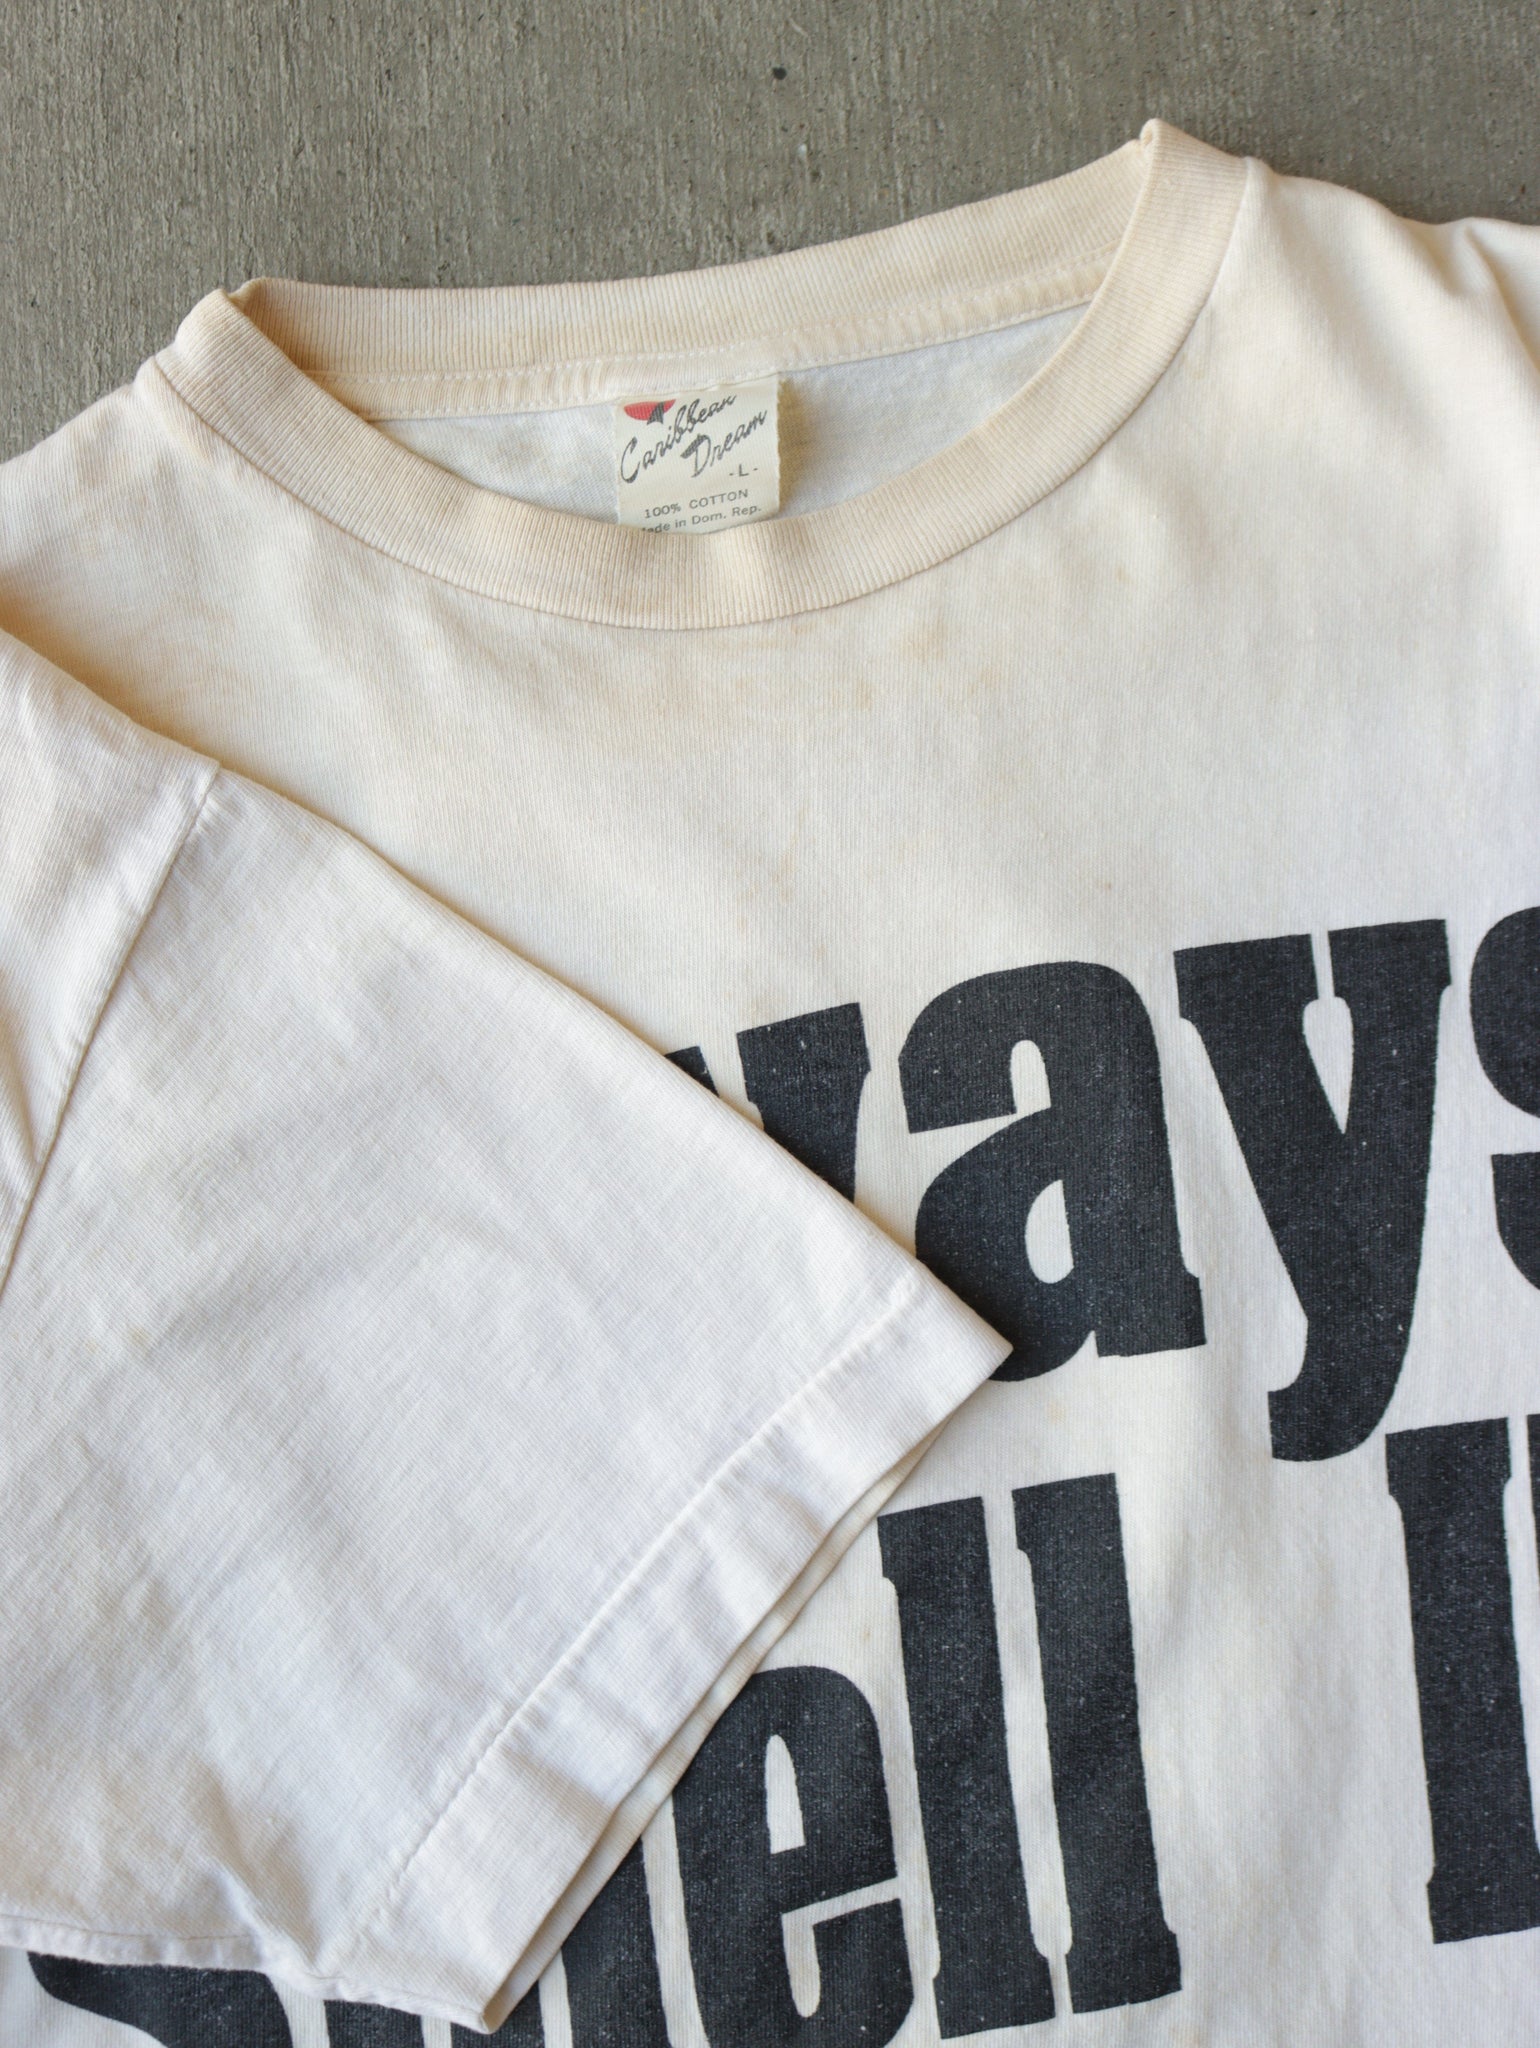 1992 'ALWAYS SMELL IT FIRST' ボクシー T シャツ - L